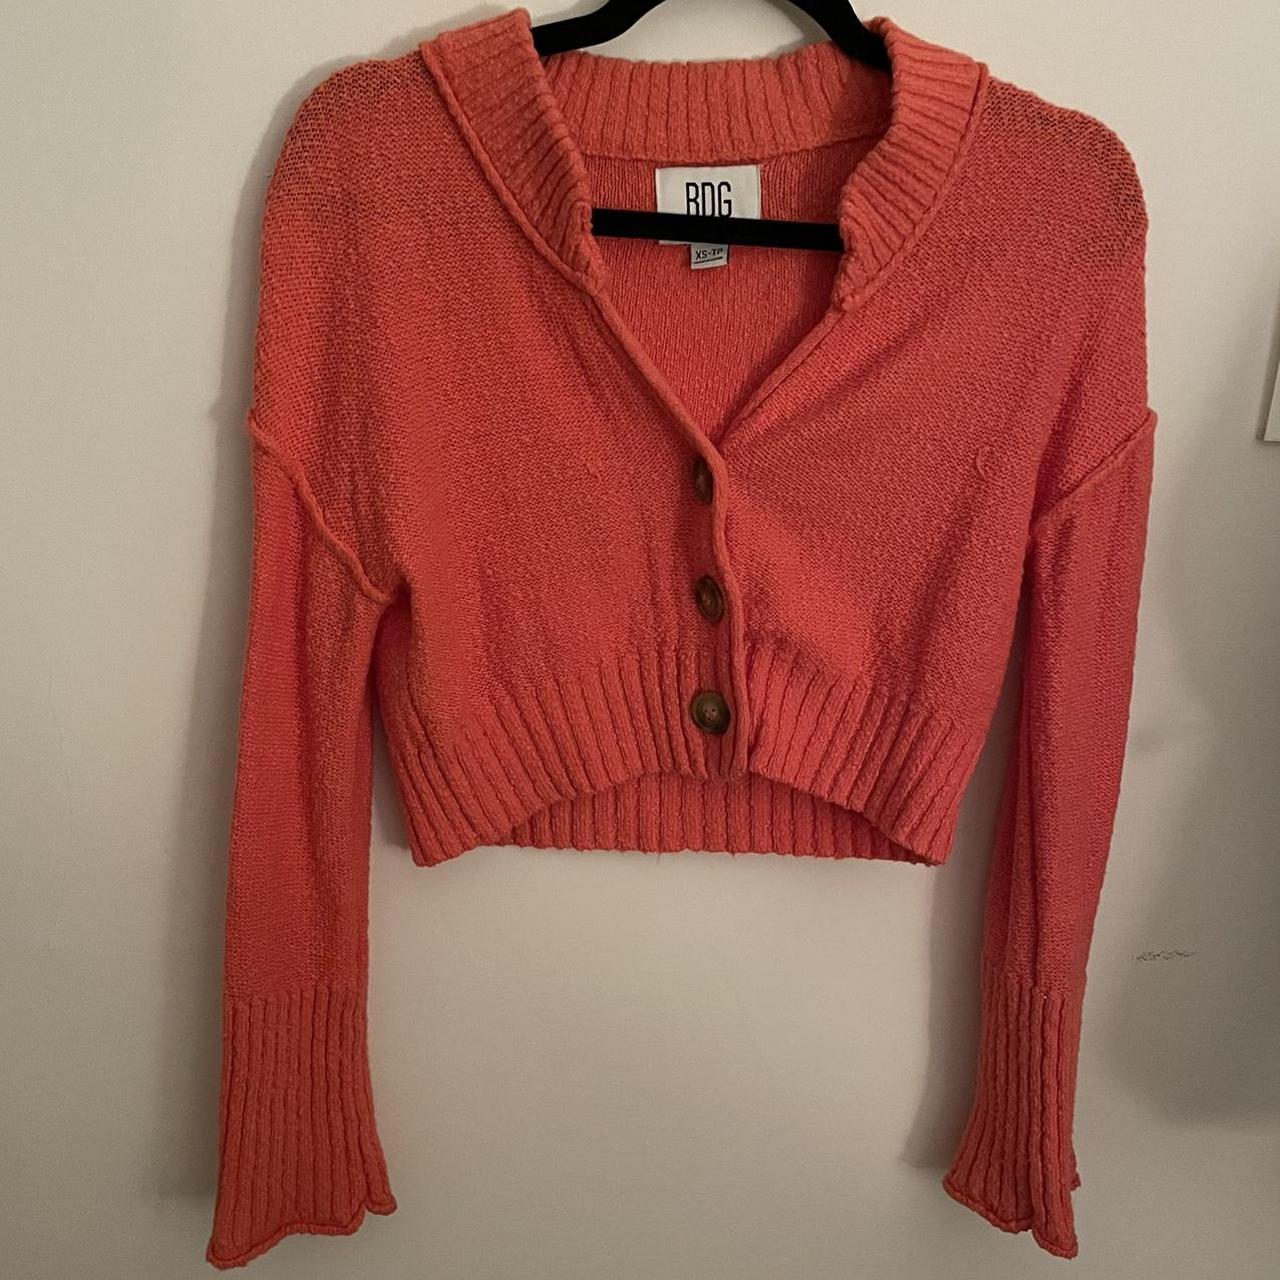 Urban Outfitters Women's Orange and Red Cardigan